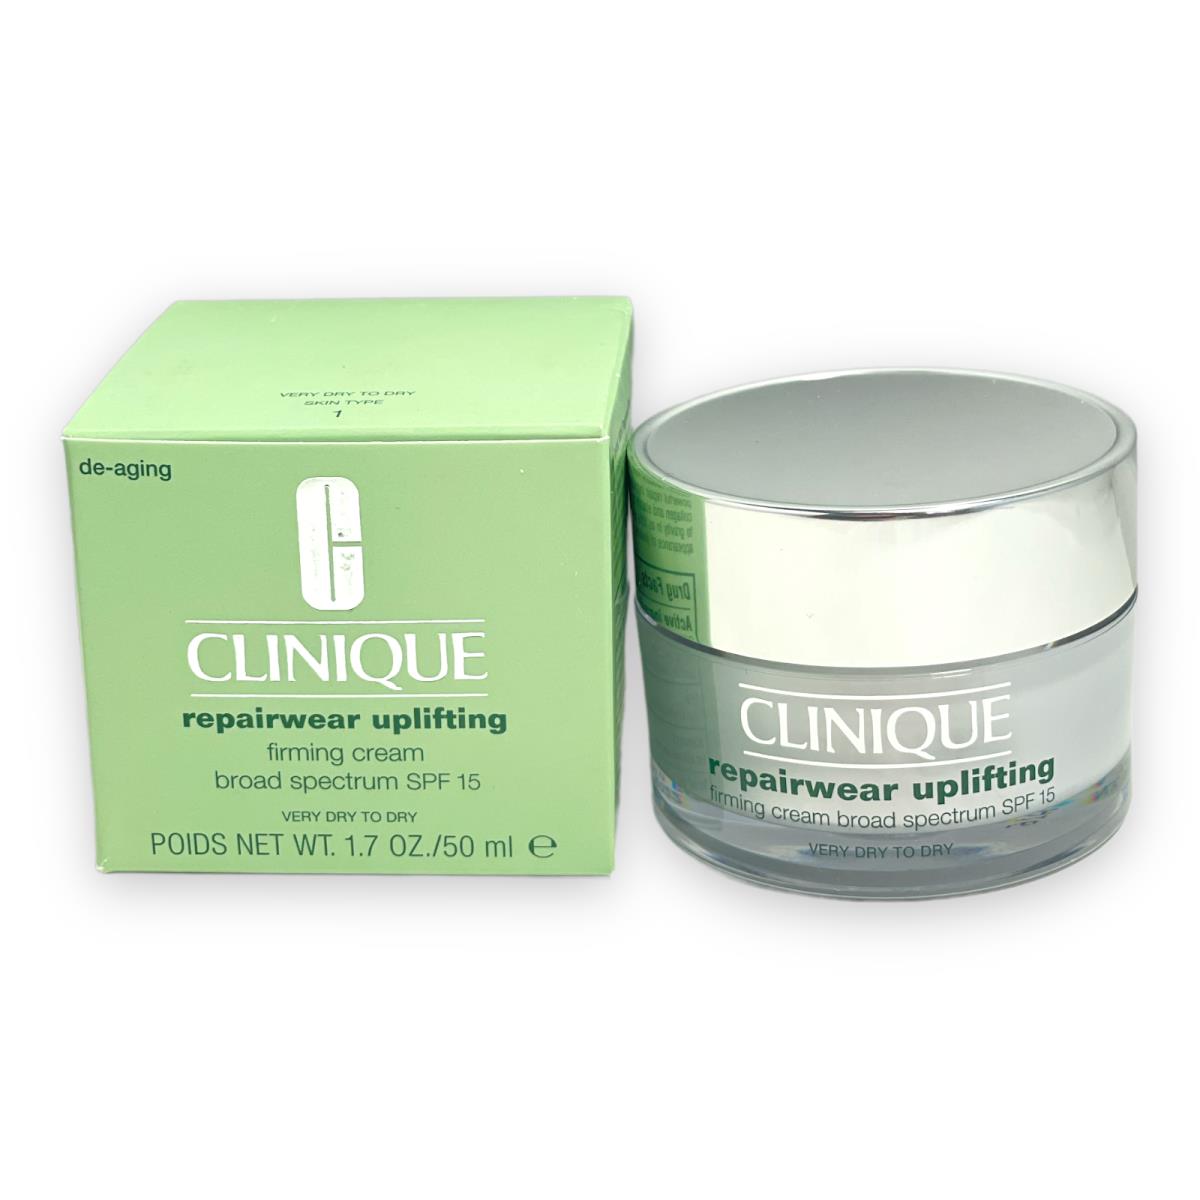 Clinique Repairwear Uplifting Firming Cream Spf 15 Very Dry to Dry 1.7oz./50ml